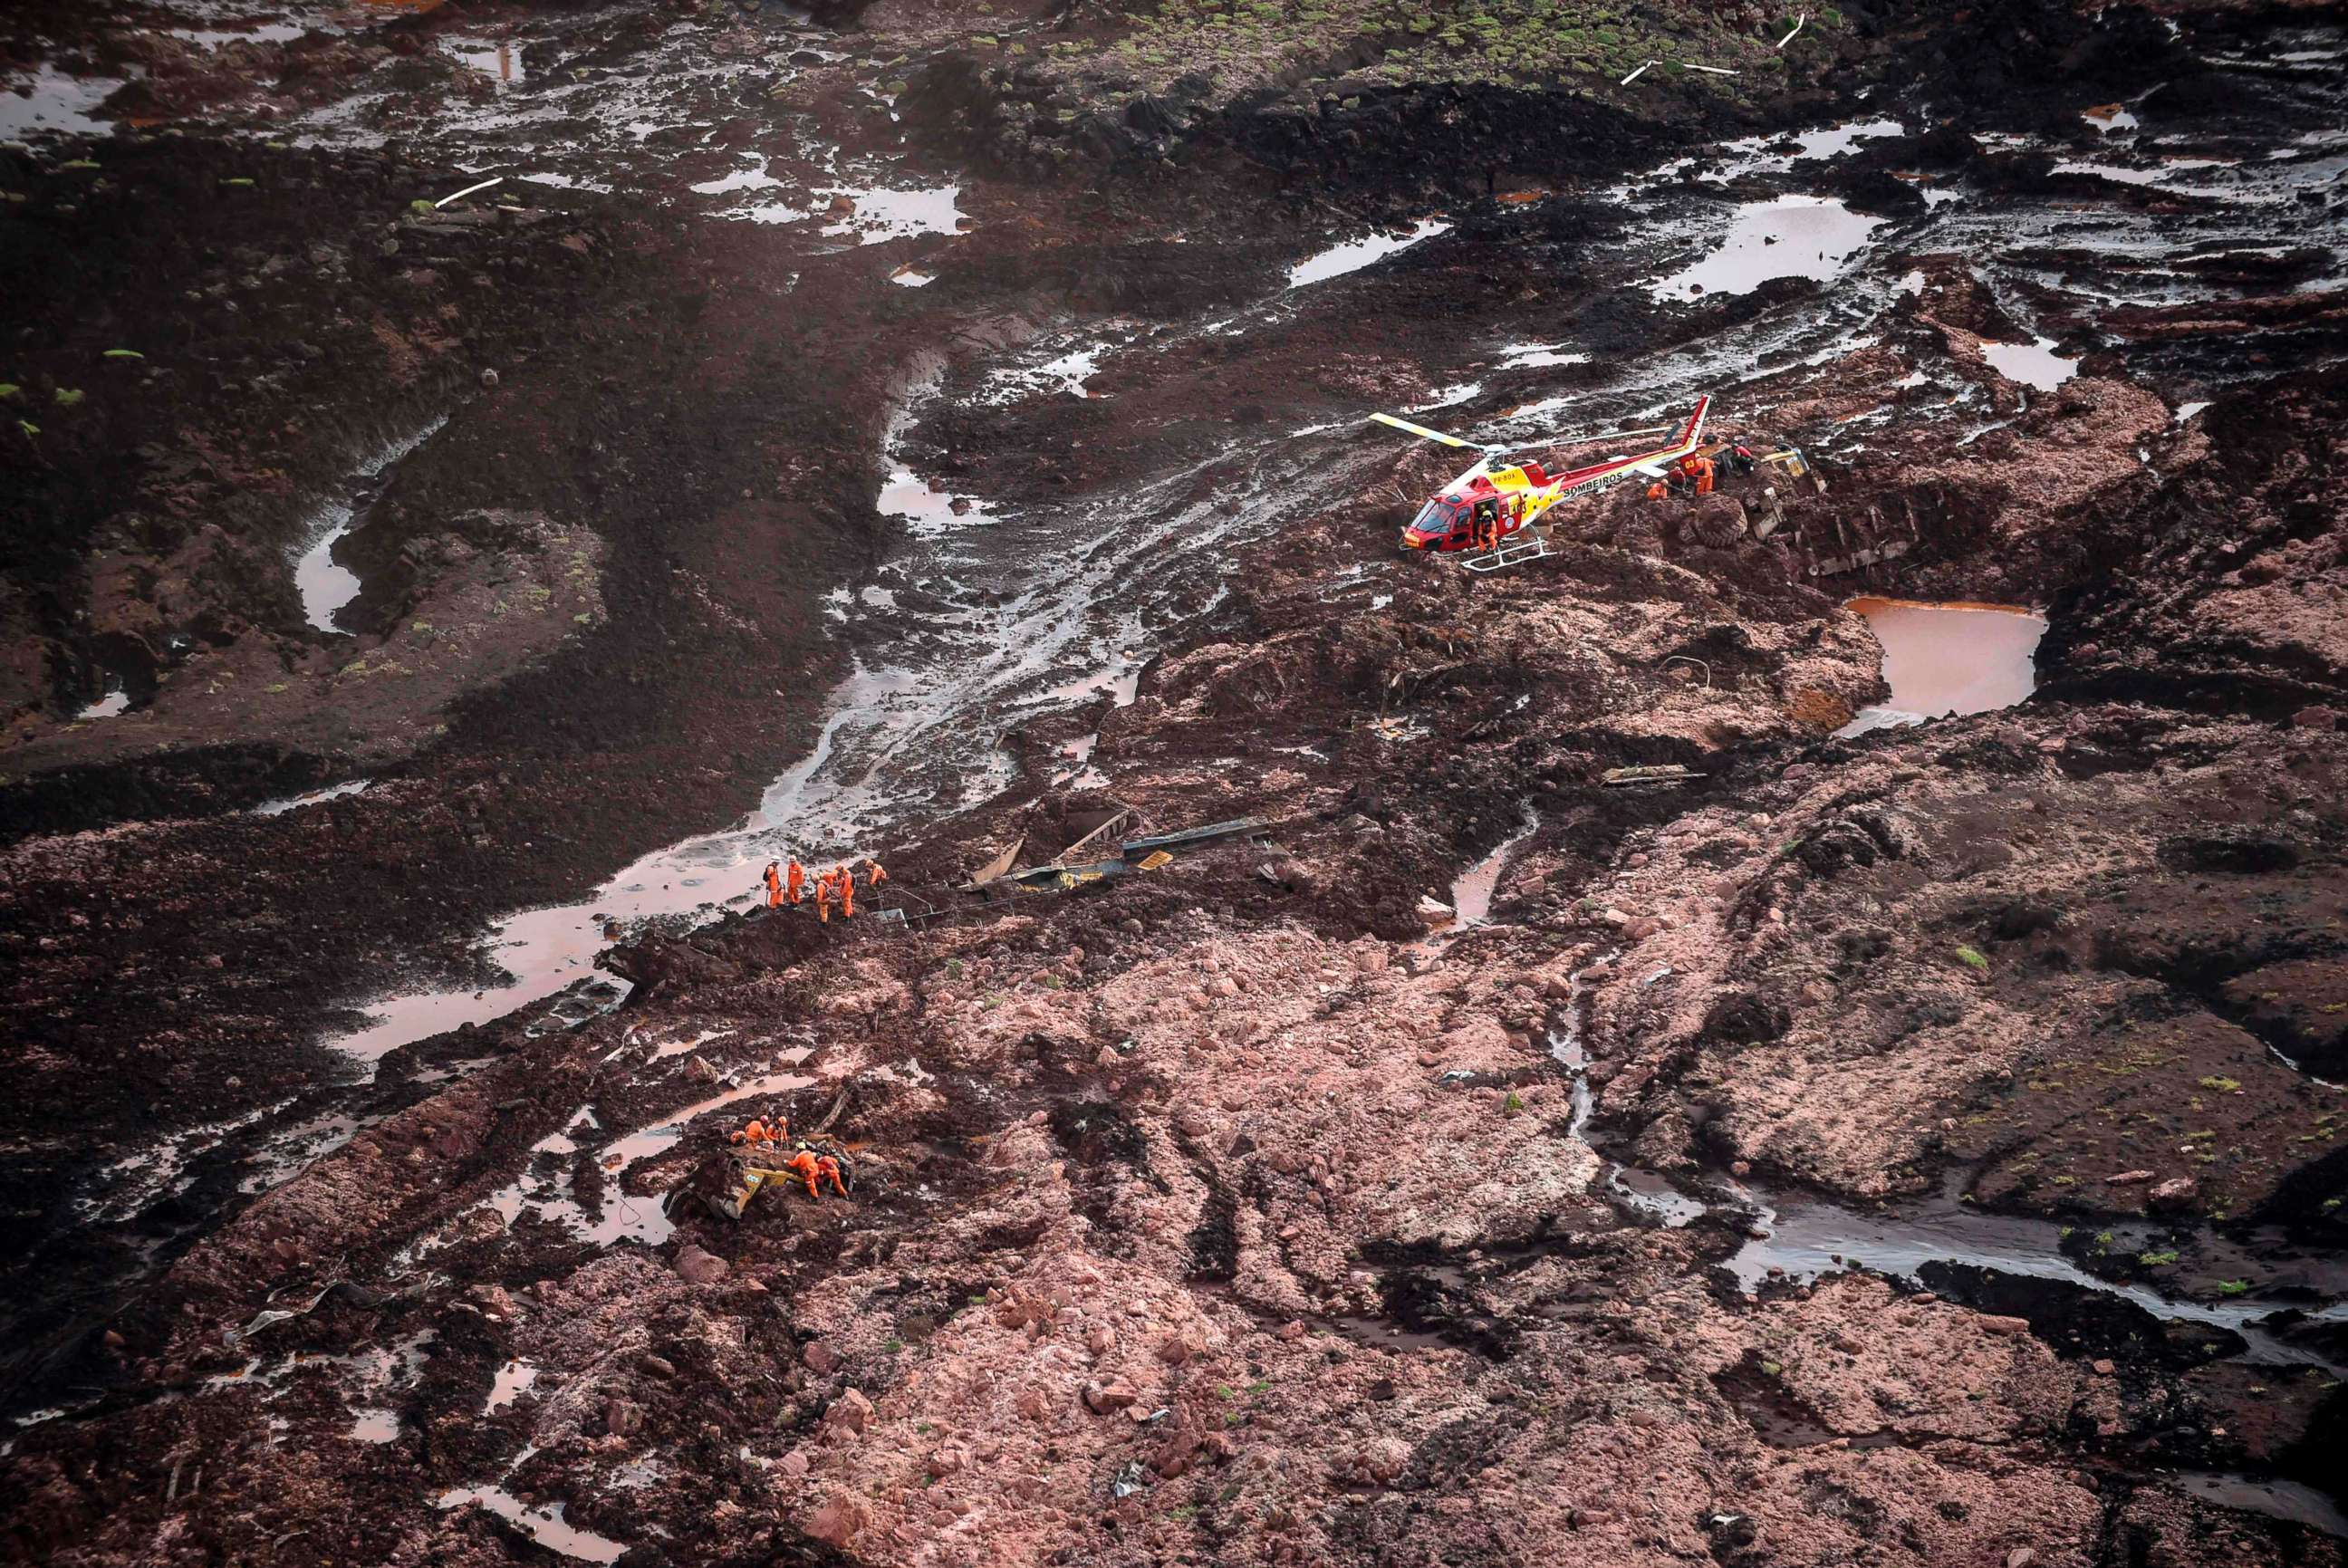 PHOTO: Rescuers search for victims after the collapse of a dam, which belonged to Brazil's giant mining company Vale, near the town of Brumadinho in southeastern Brazil, Jan. 25, 2019.